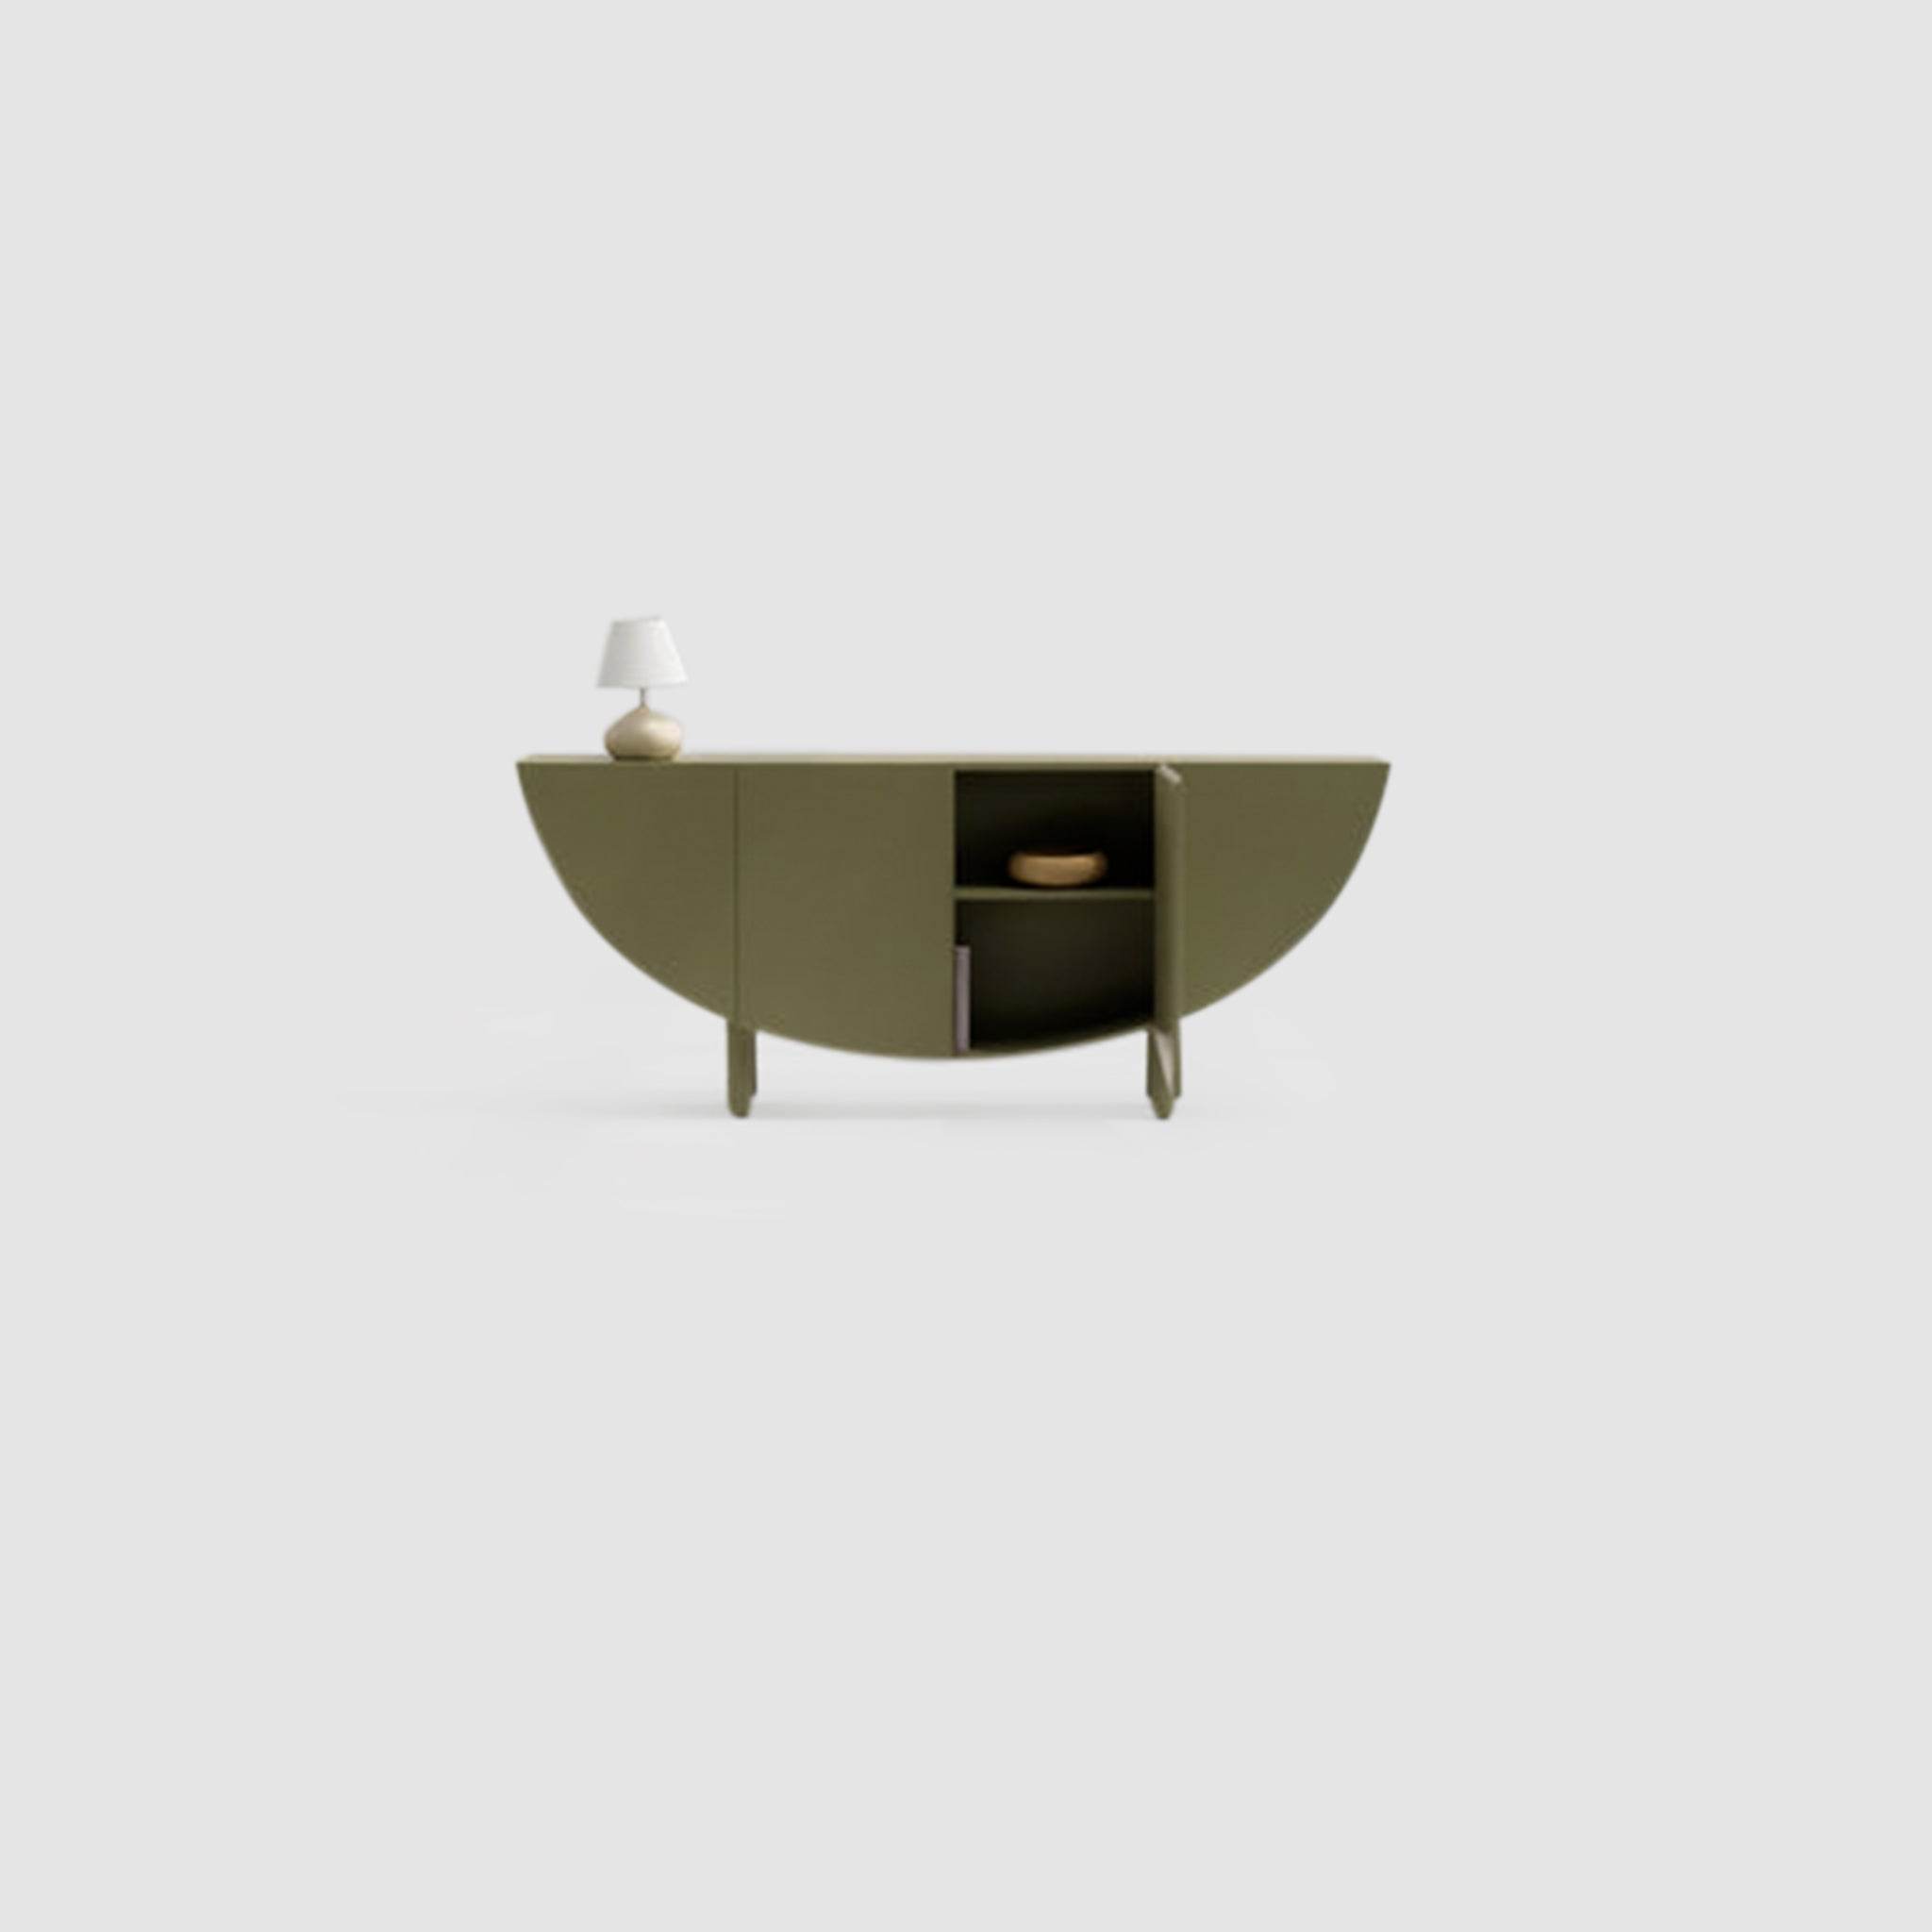 A minimalist olive green sideboard with a half-moon design, featuring an open compartment and a small white table lamp on top, set against a light gray background